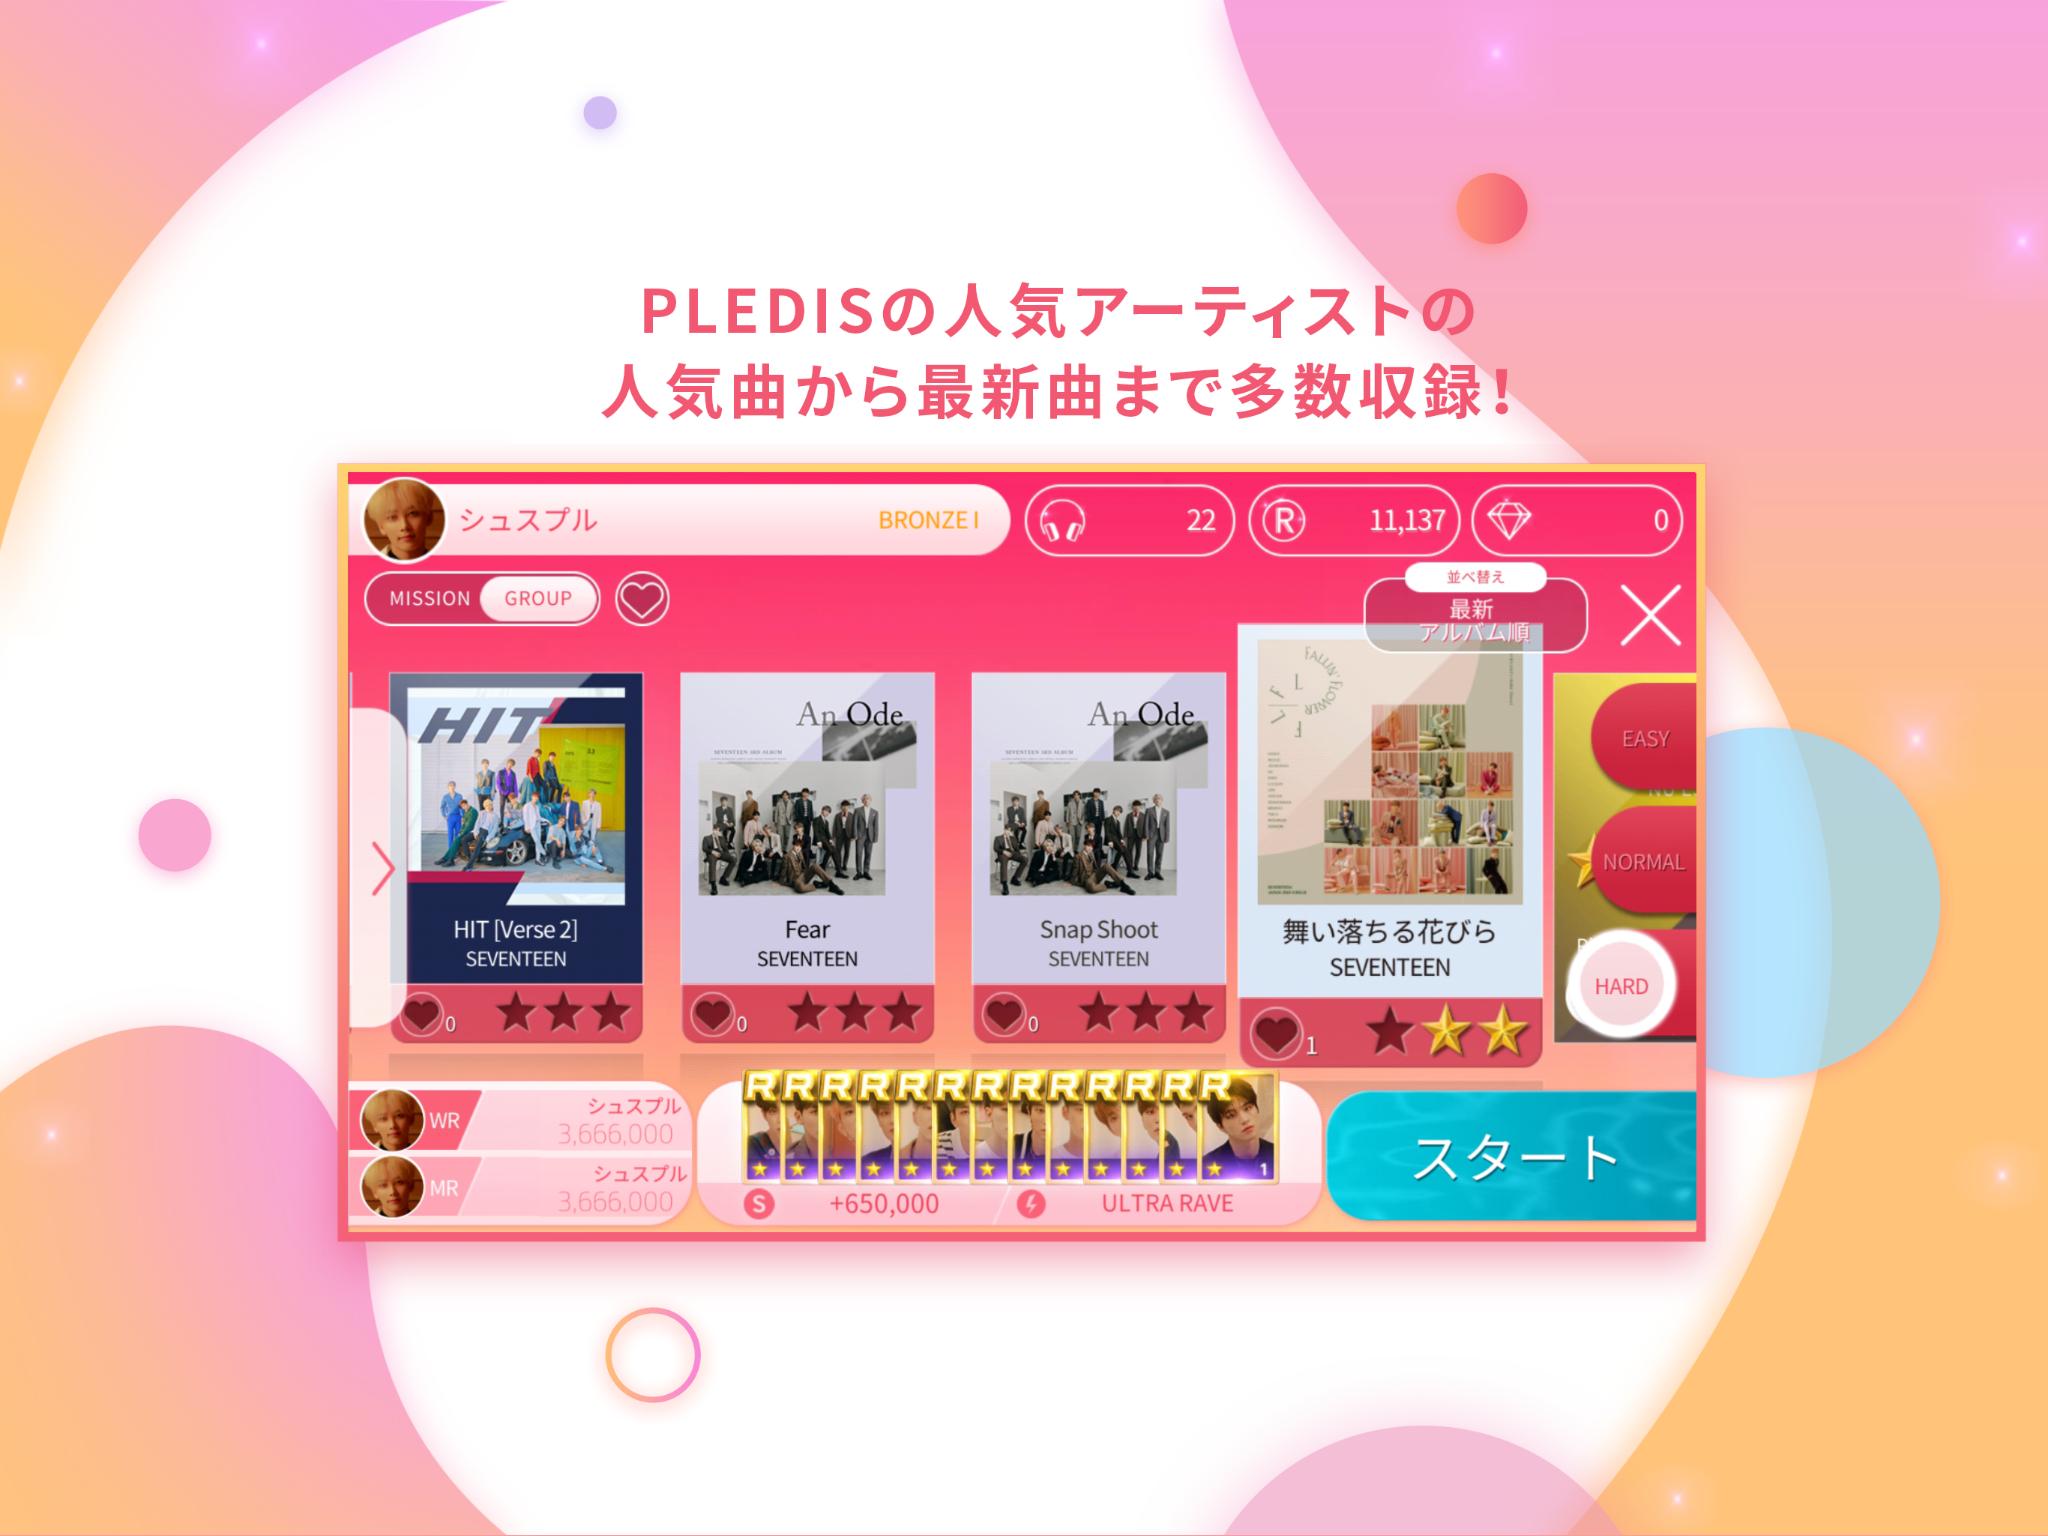 SUPERSTAR PLEDIS for Android - APK Download